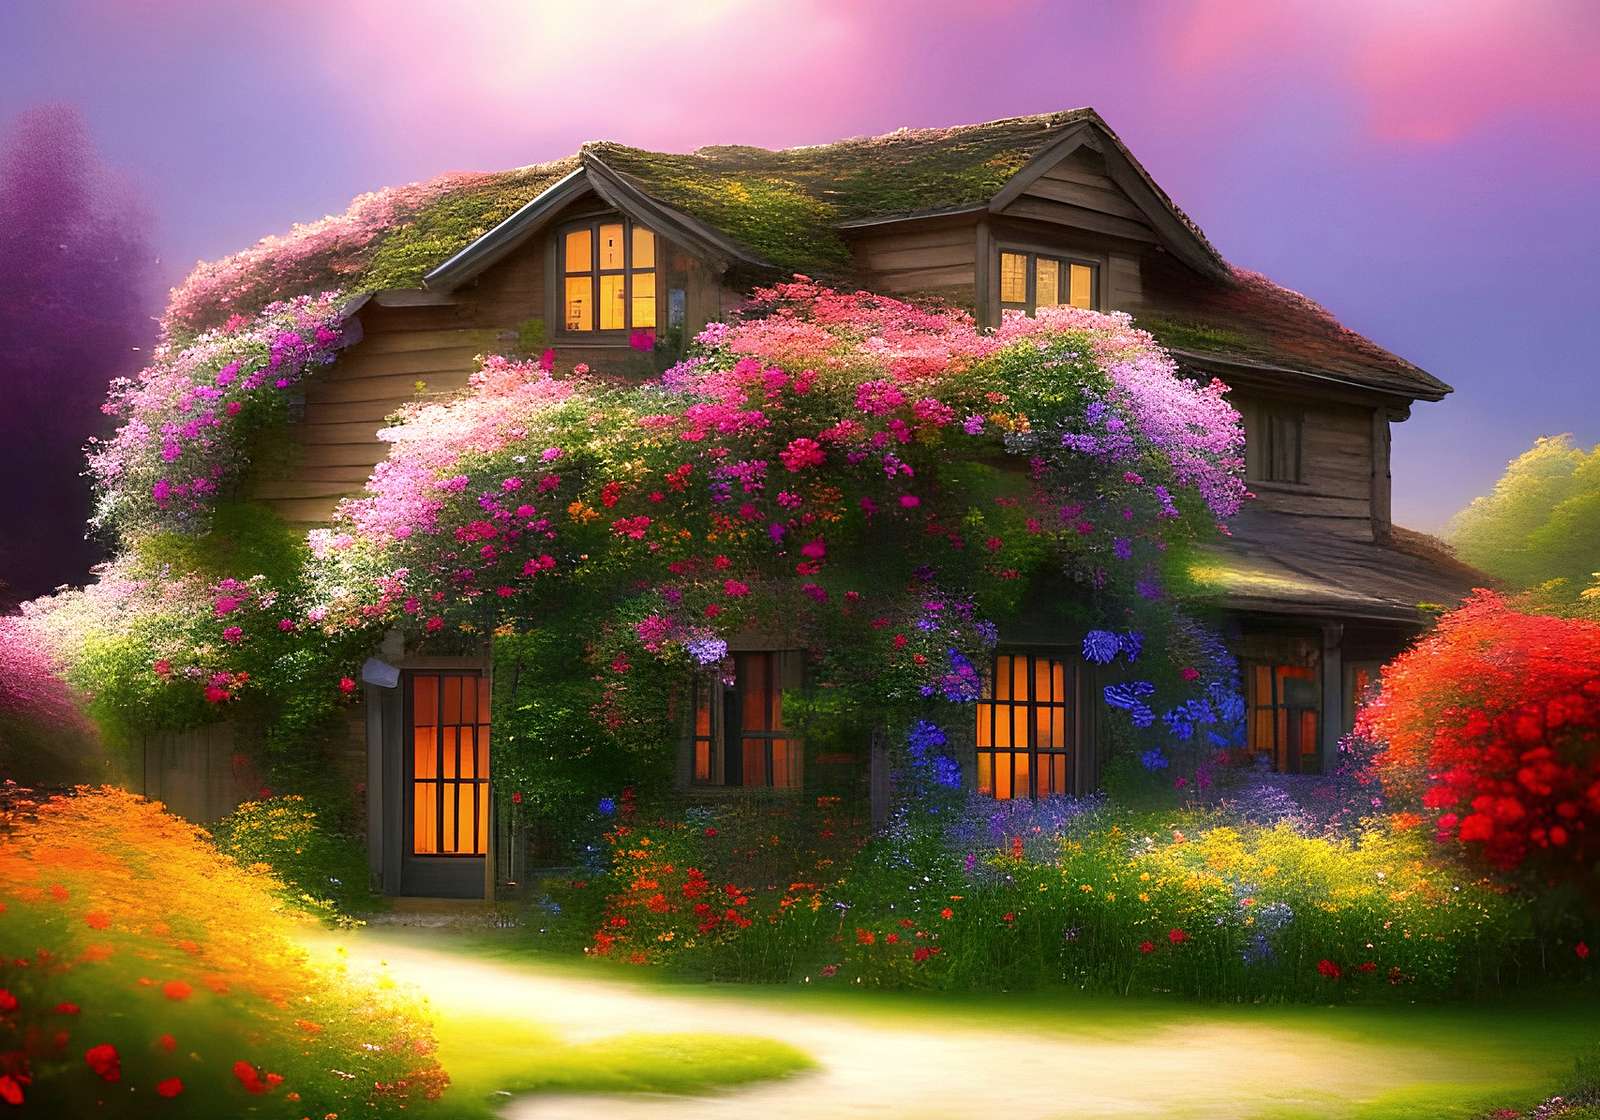 A magical house among flowers online puzzle